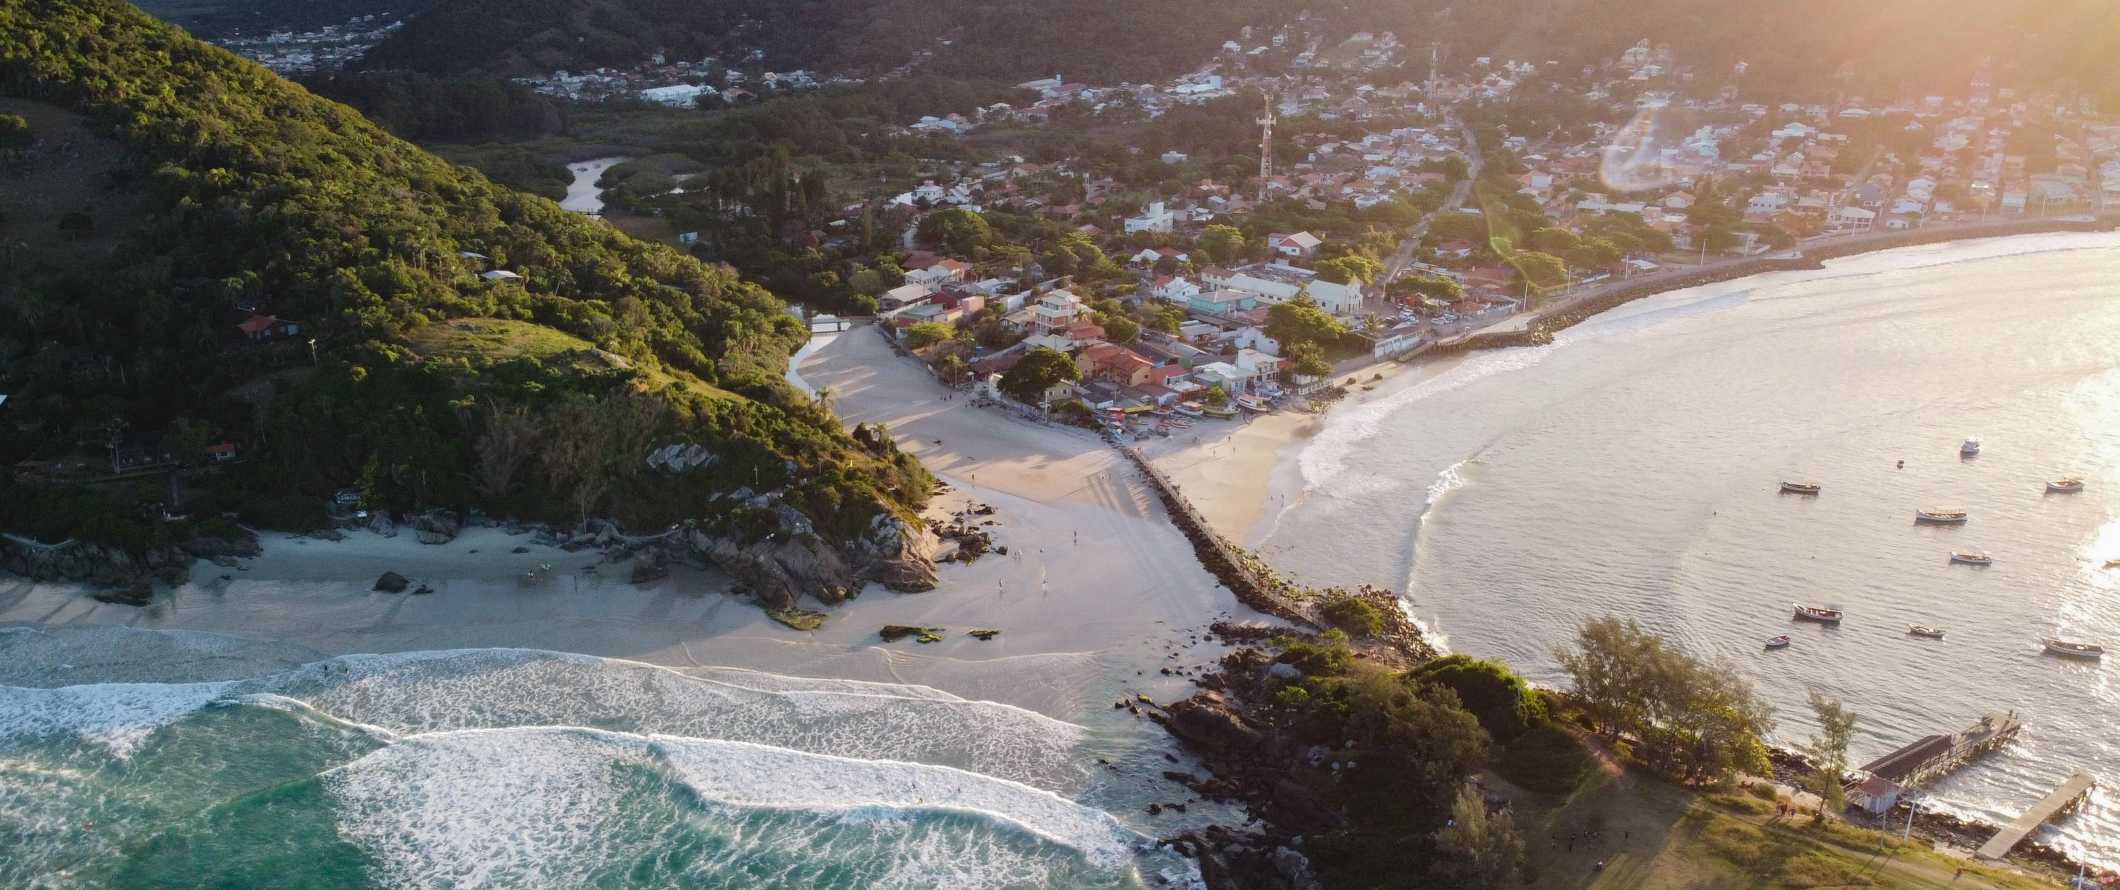 Drone view of beaches, houses, and mountains in the background of Florianópolis, Brazil